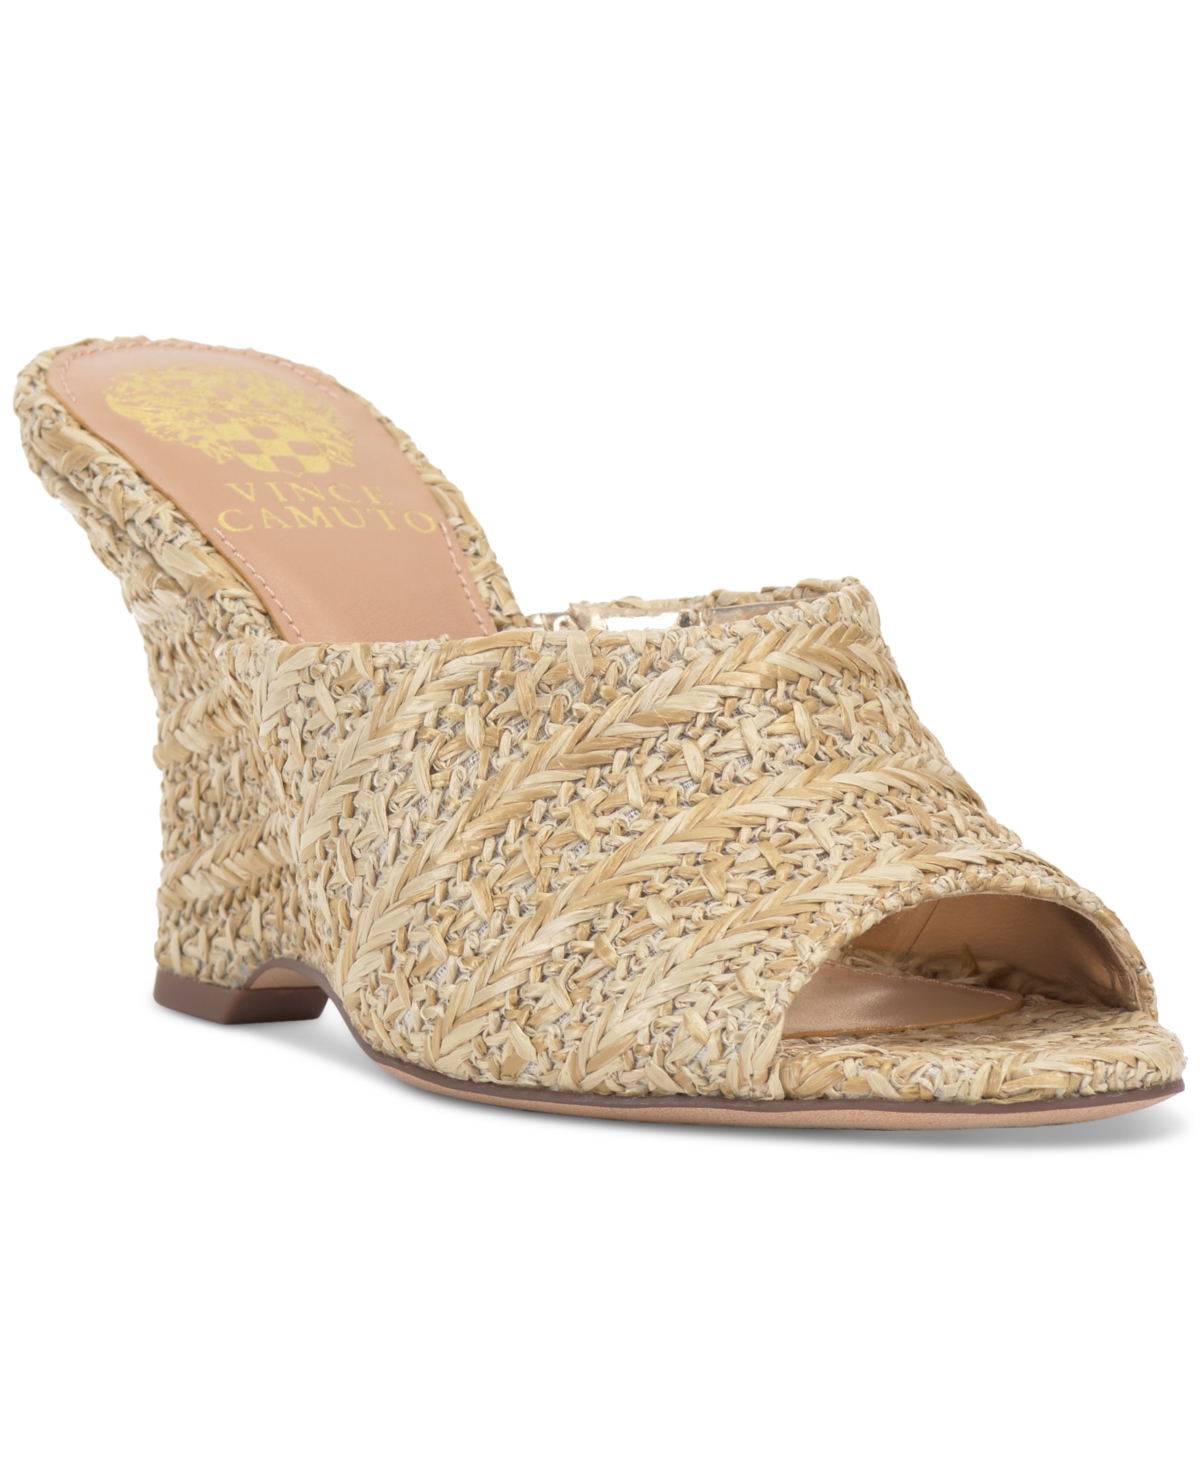 VINCE CAMUTO WOMEN'S VILTY SCULPTED SLIP-ON WEDGE SANDALS